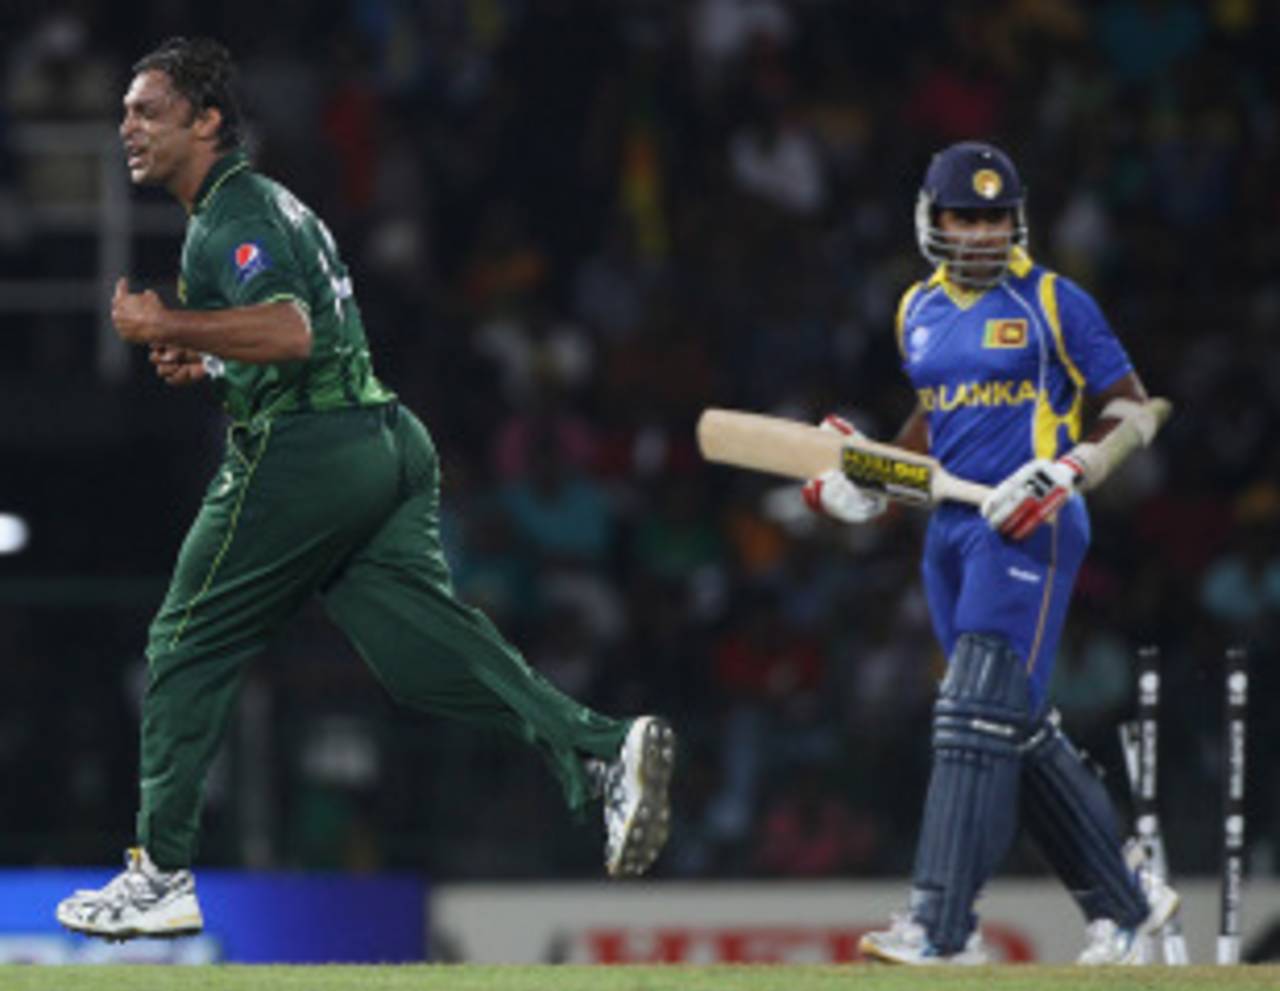 Shoaib Akhtar's removal from Mahela Jayawardene was one of many highlights in a pulsating match&nbsp;&nbsp;&bull;&nbsp;&nbsp;Getty Images